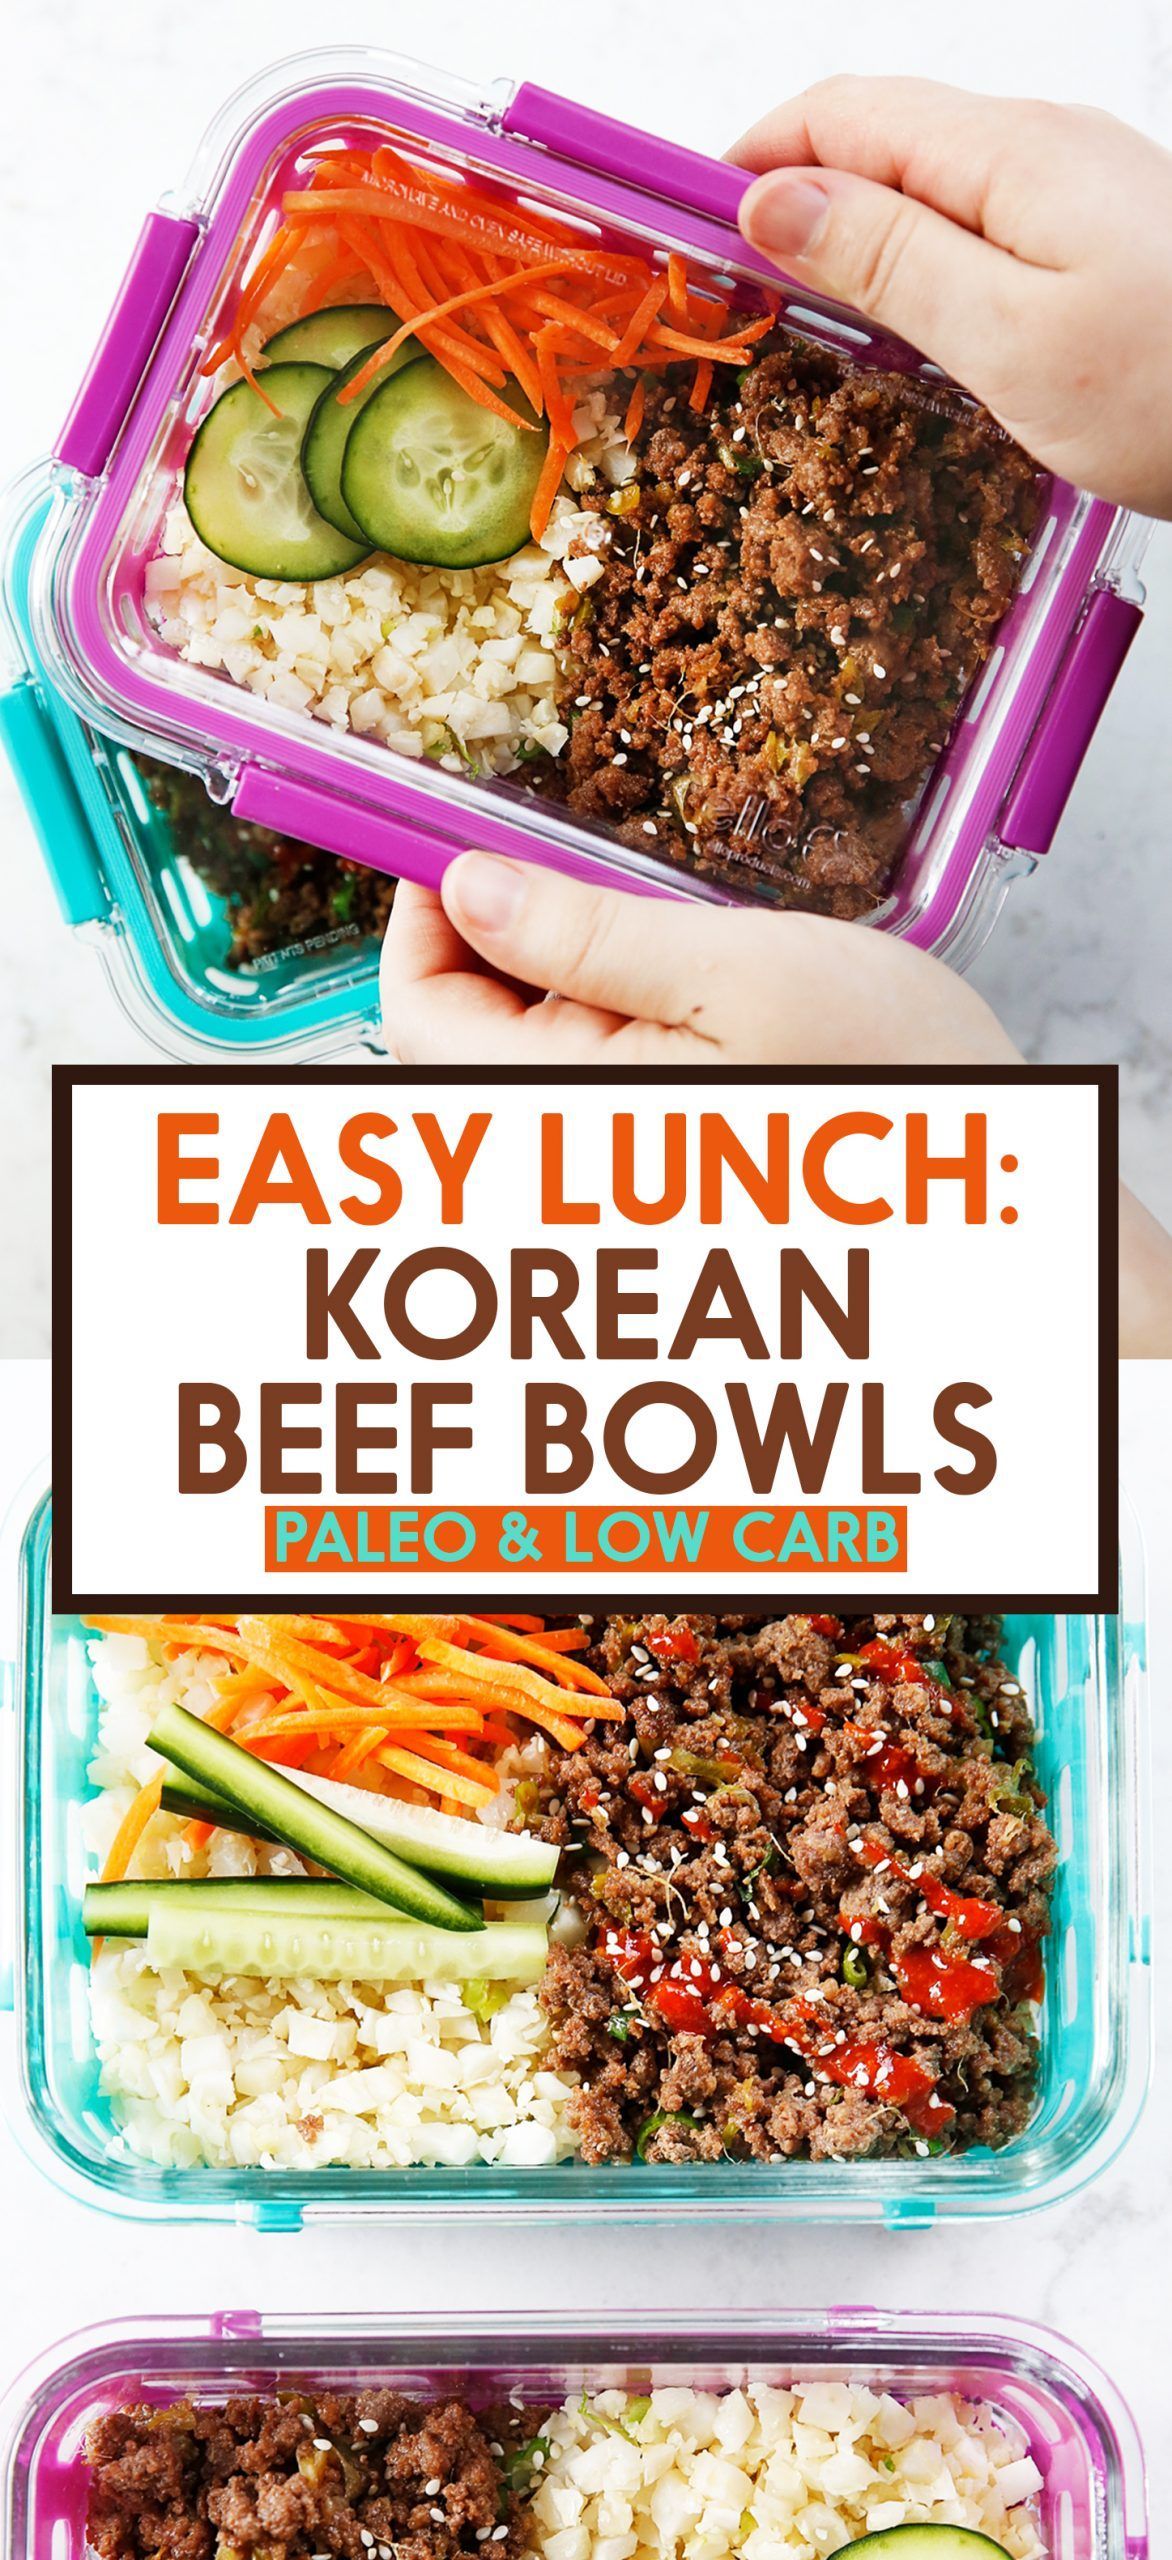 Korean Ground Beef Bowls (Meal Prep!) - Lexi's Clean Kitchen -   15 healthy recipes Beef cleanses ideas